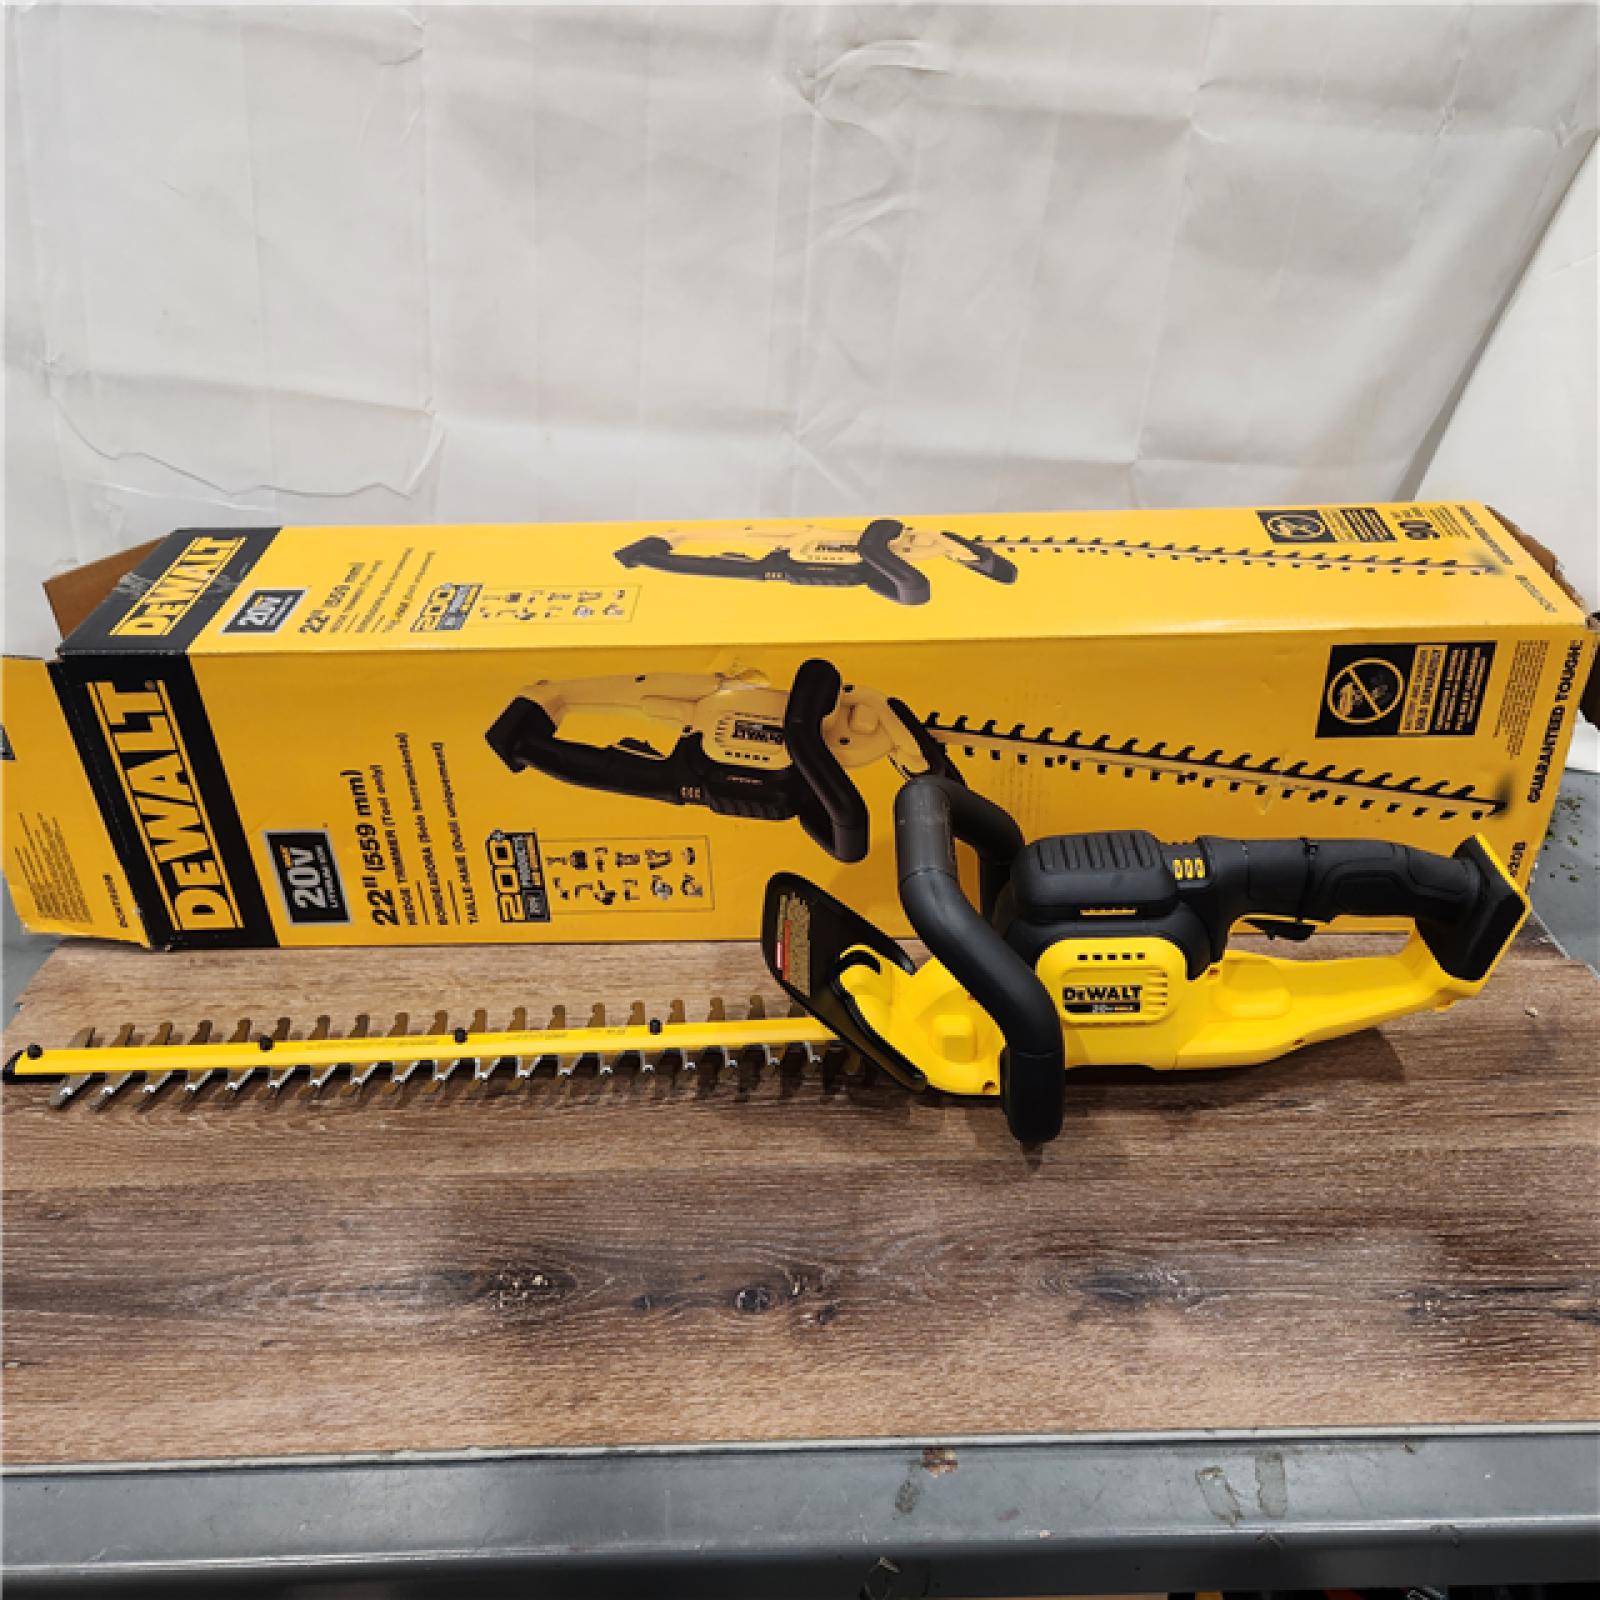 AS-IS DEWALT  20V MAX Cordless Battery Powered Hedge Trimmer (Tool Only)